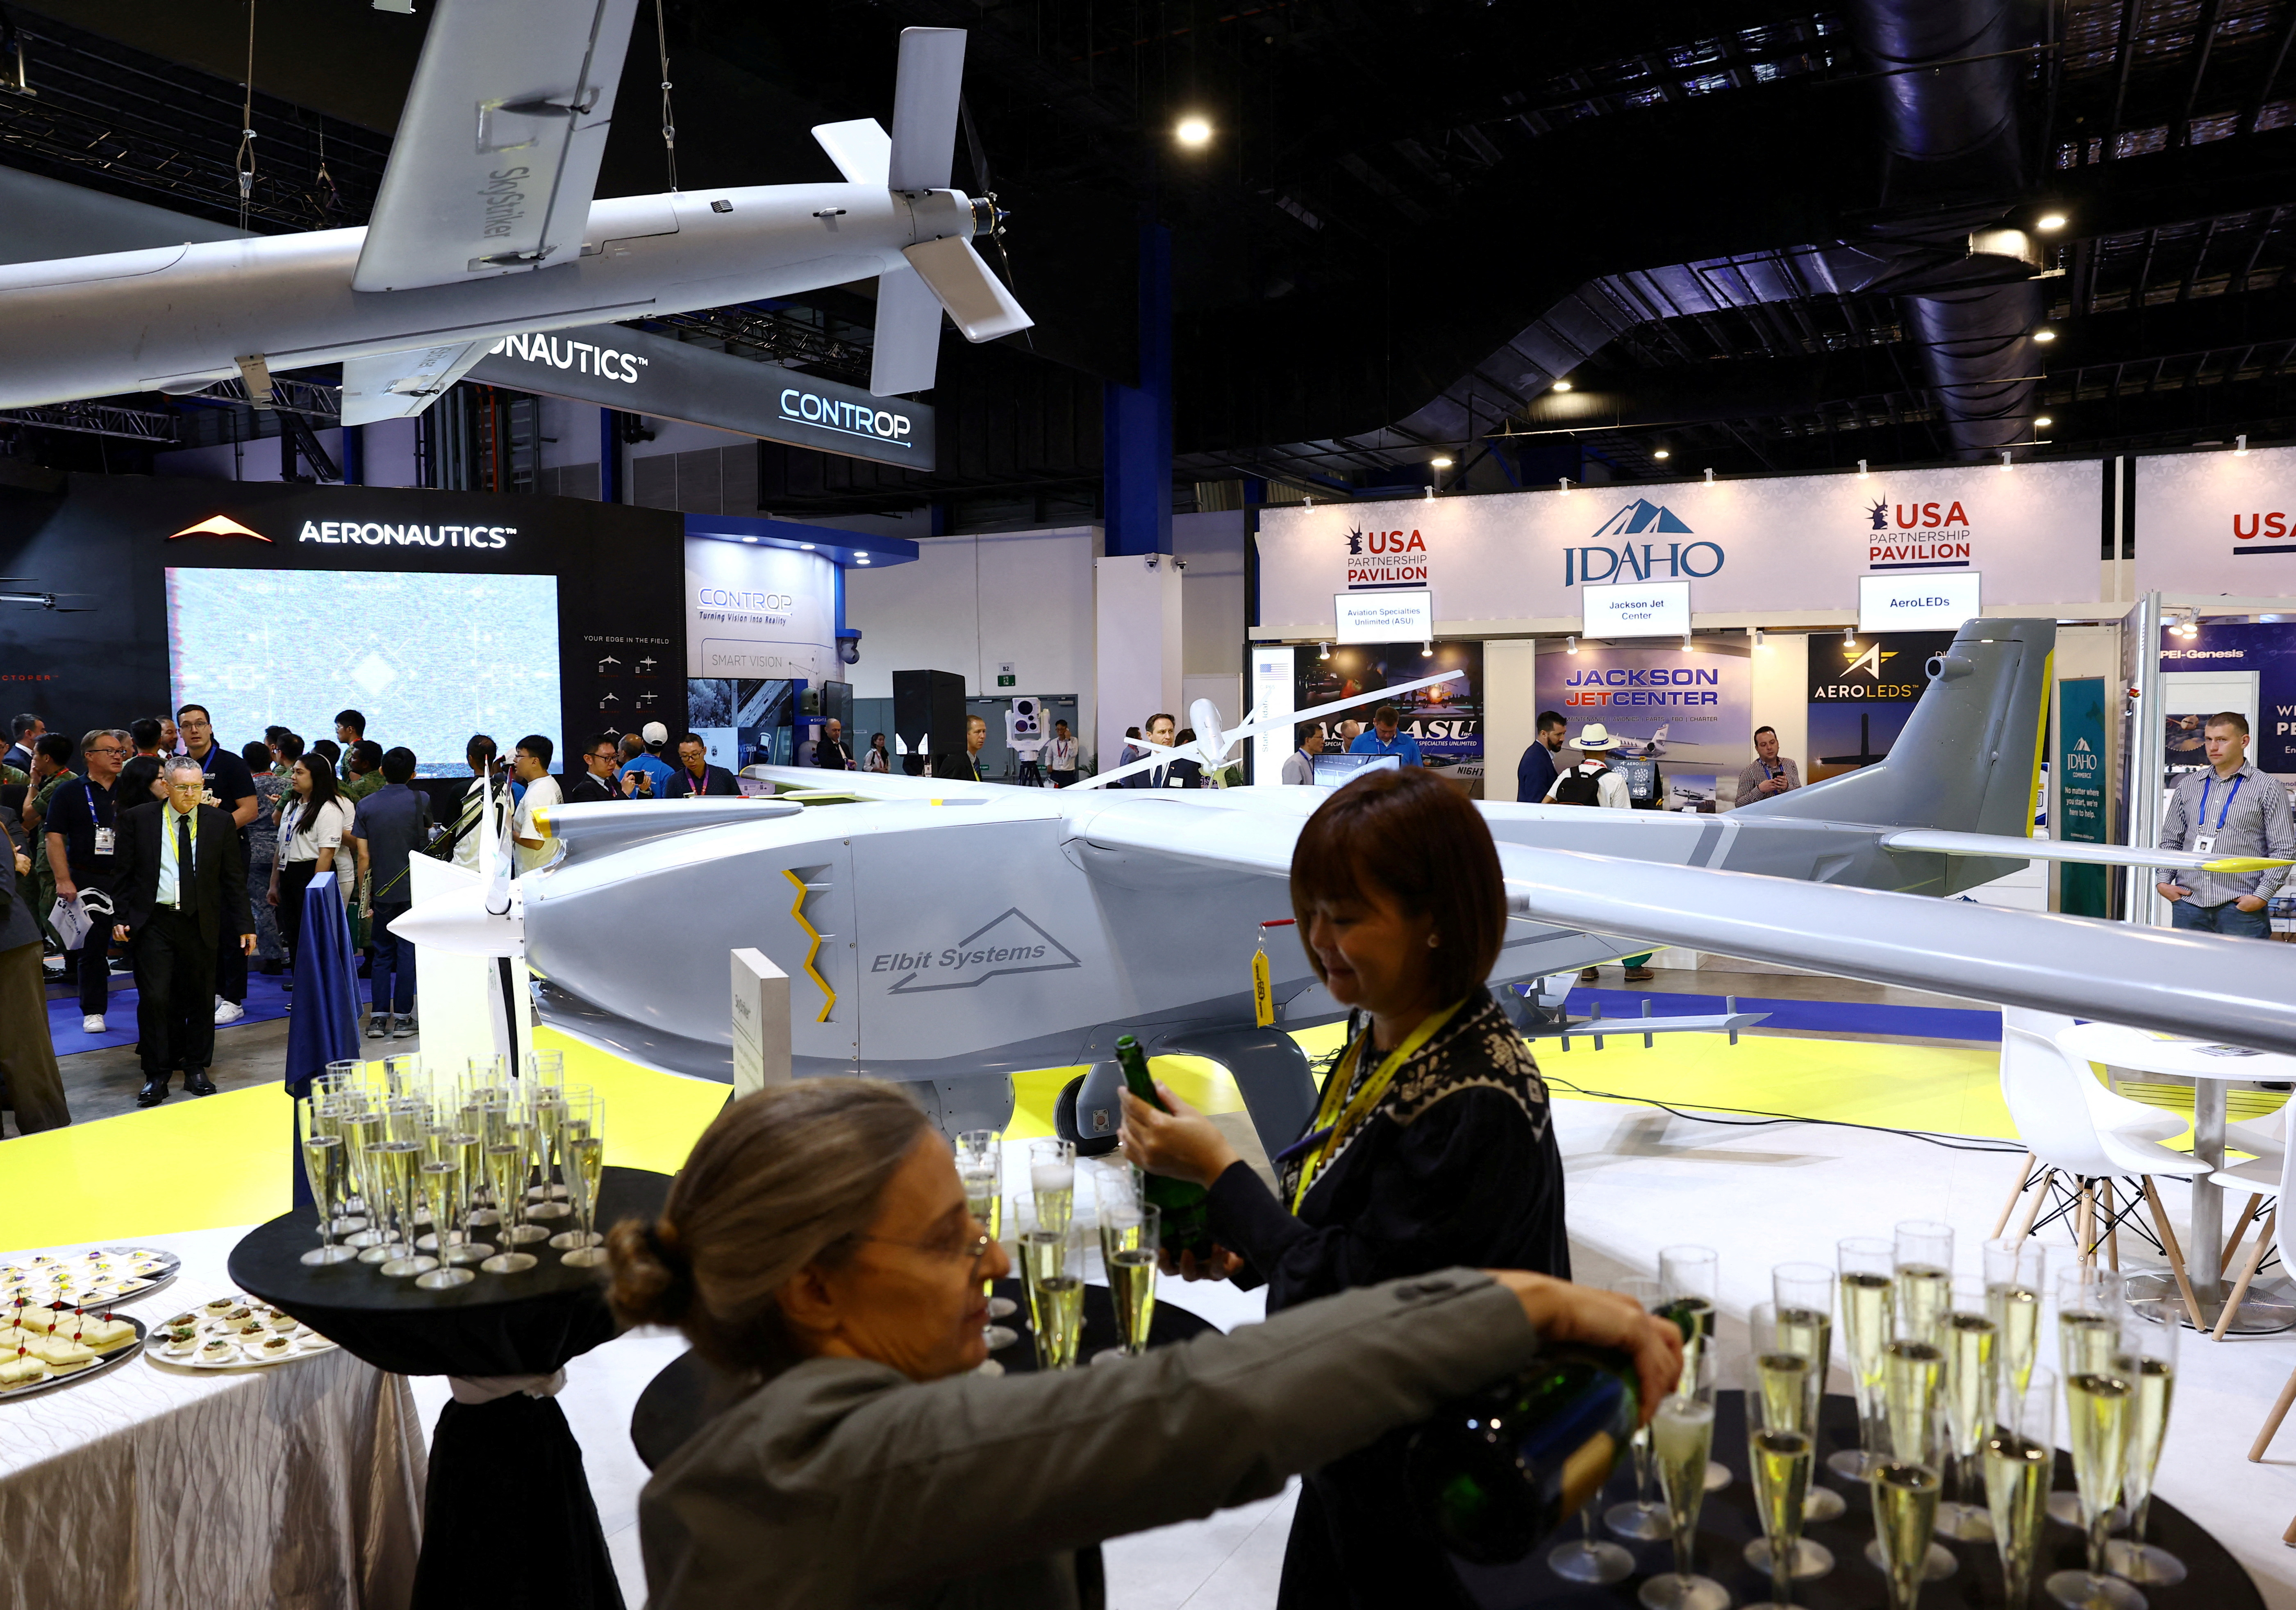 Israel's Elbit Systems launches the Hermes 650 Spark unmanned aerial vehicle (UAV) during the Singapore Airshow